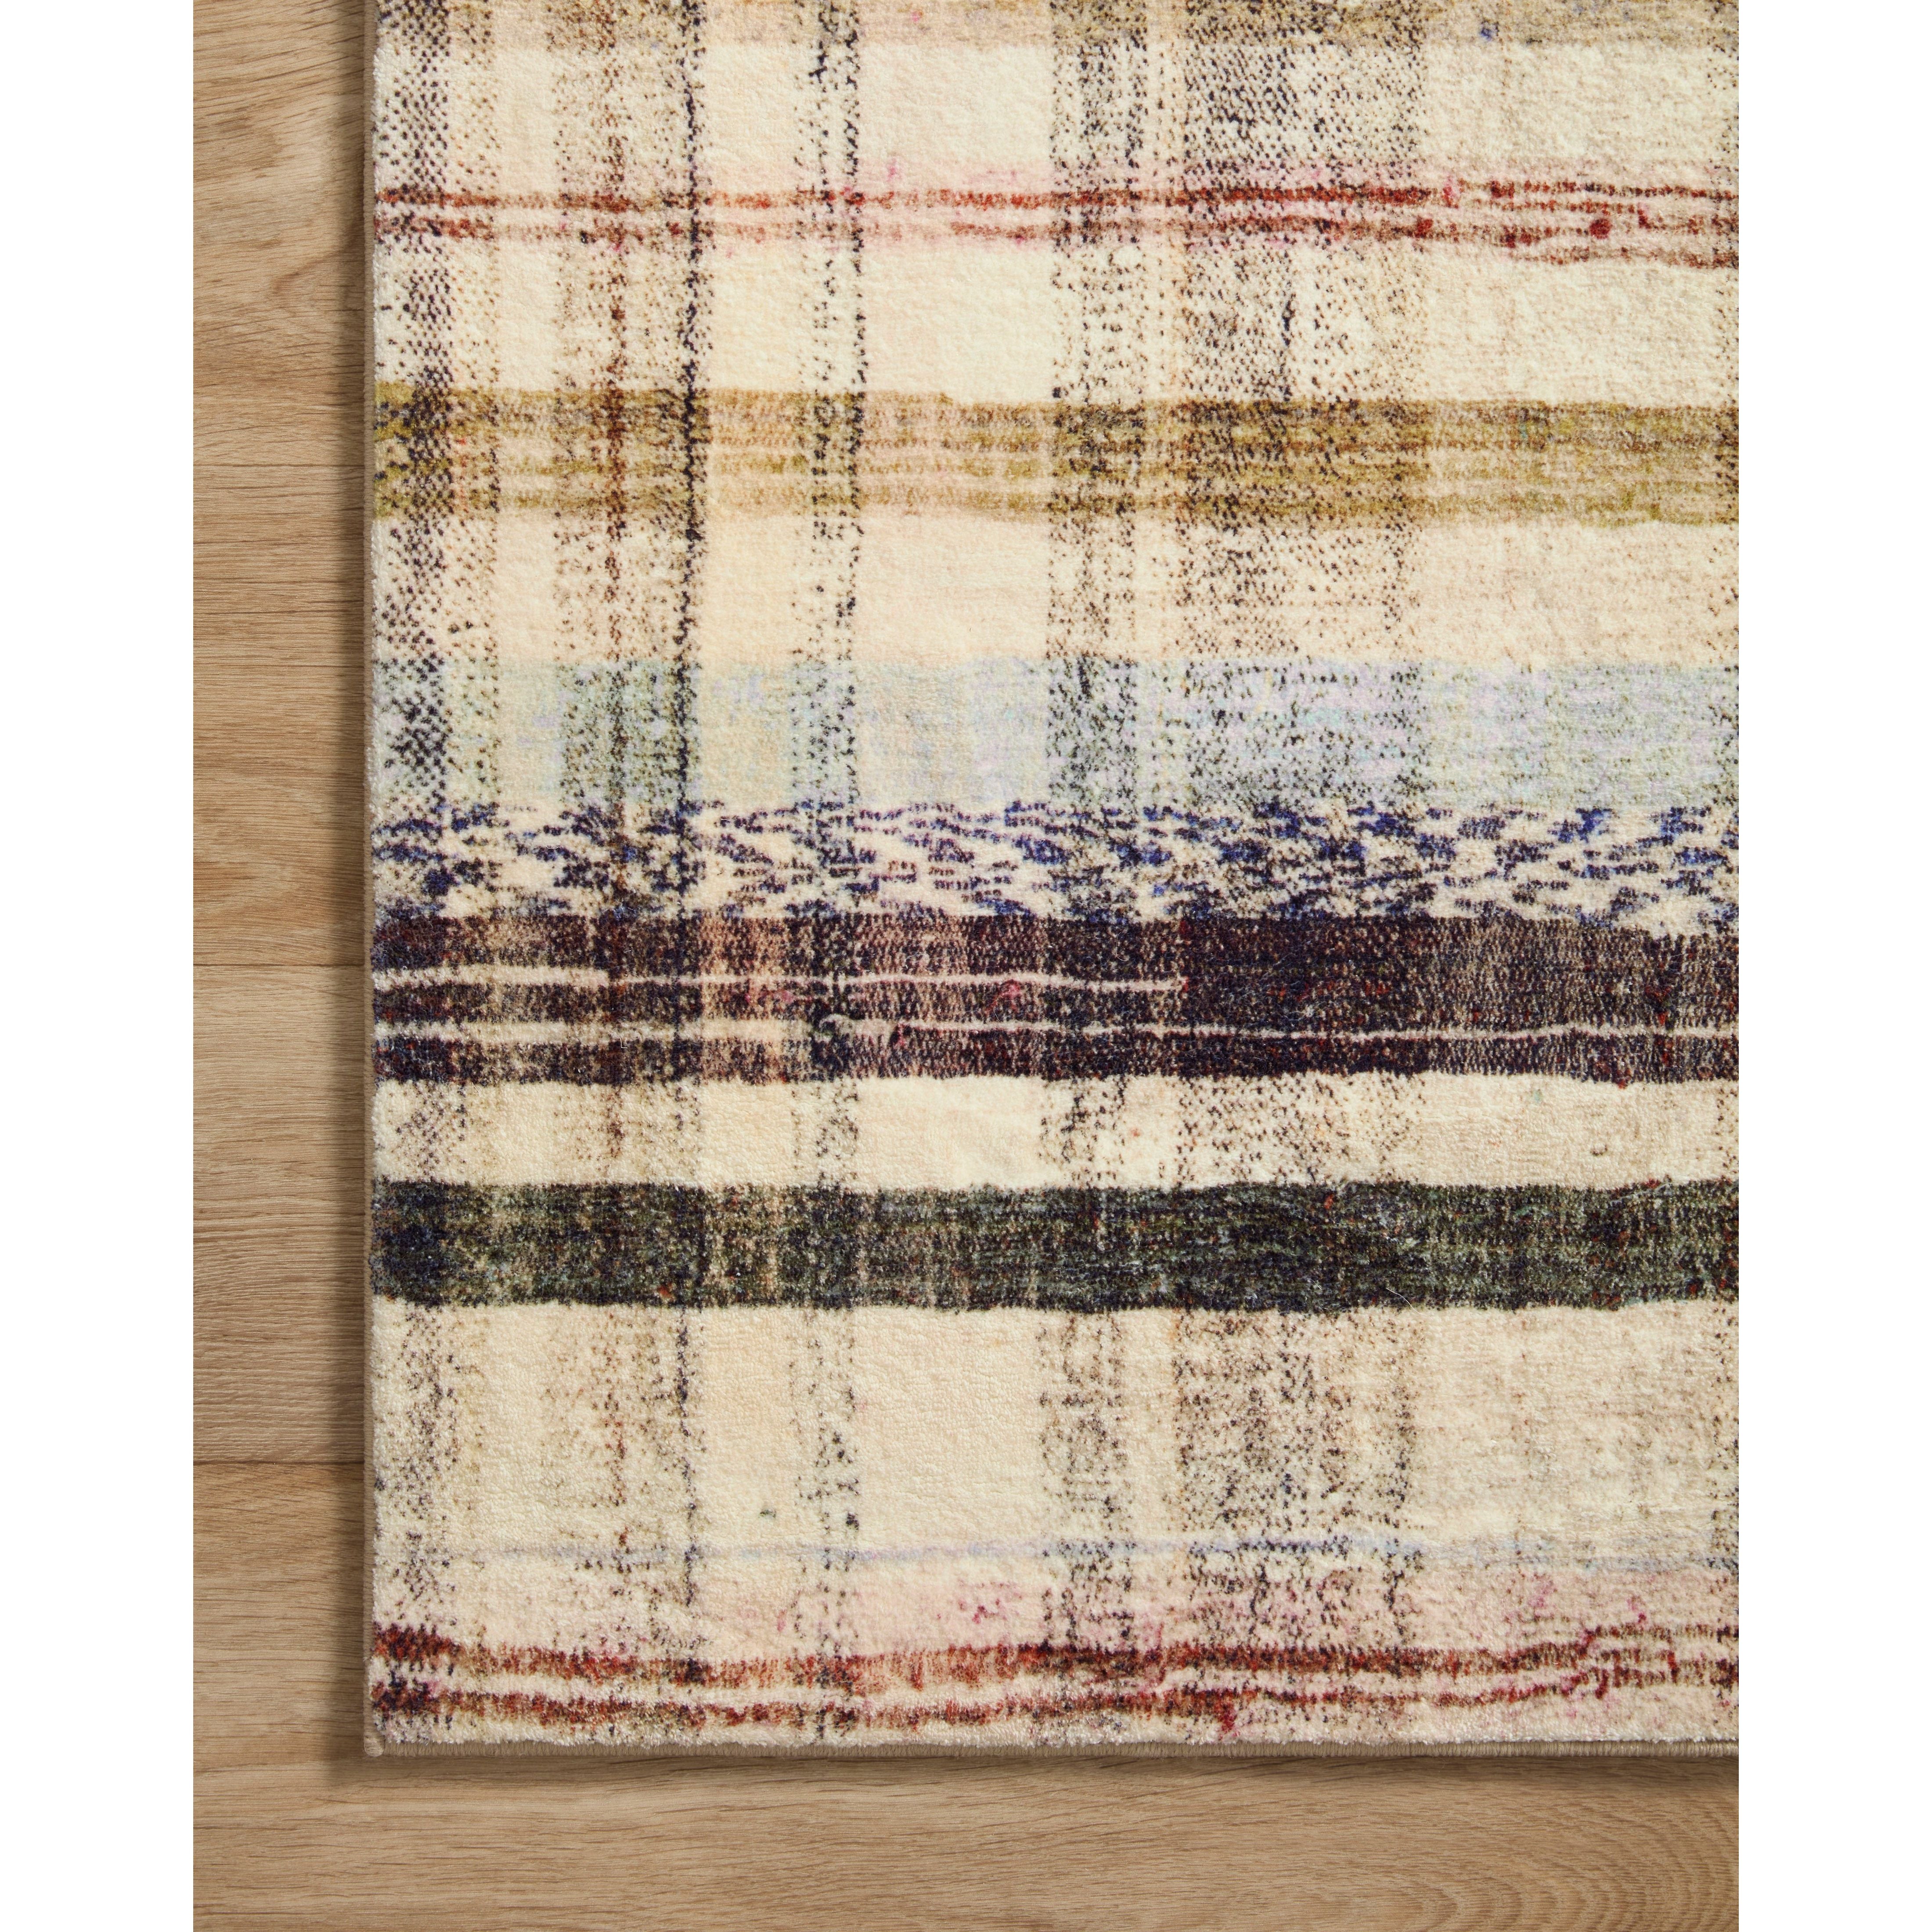 This trademarked “cloud pile” feel by Loloi rugs is sooooo cozy. The Humphrey Ivory / Multi rug needs to be in a bedroom or a fun hangout spot pronto! Amethyst favorite! Amethyst Home provides interior design services, furniture, rugs, and lighting in the Washington metro area.